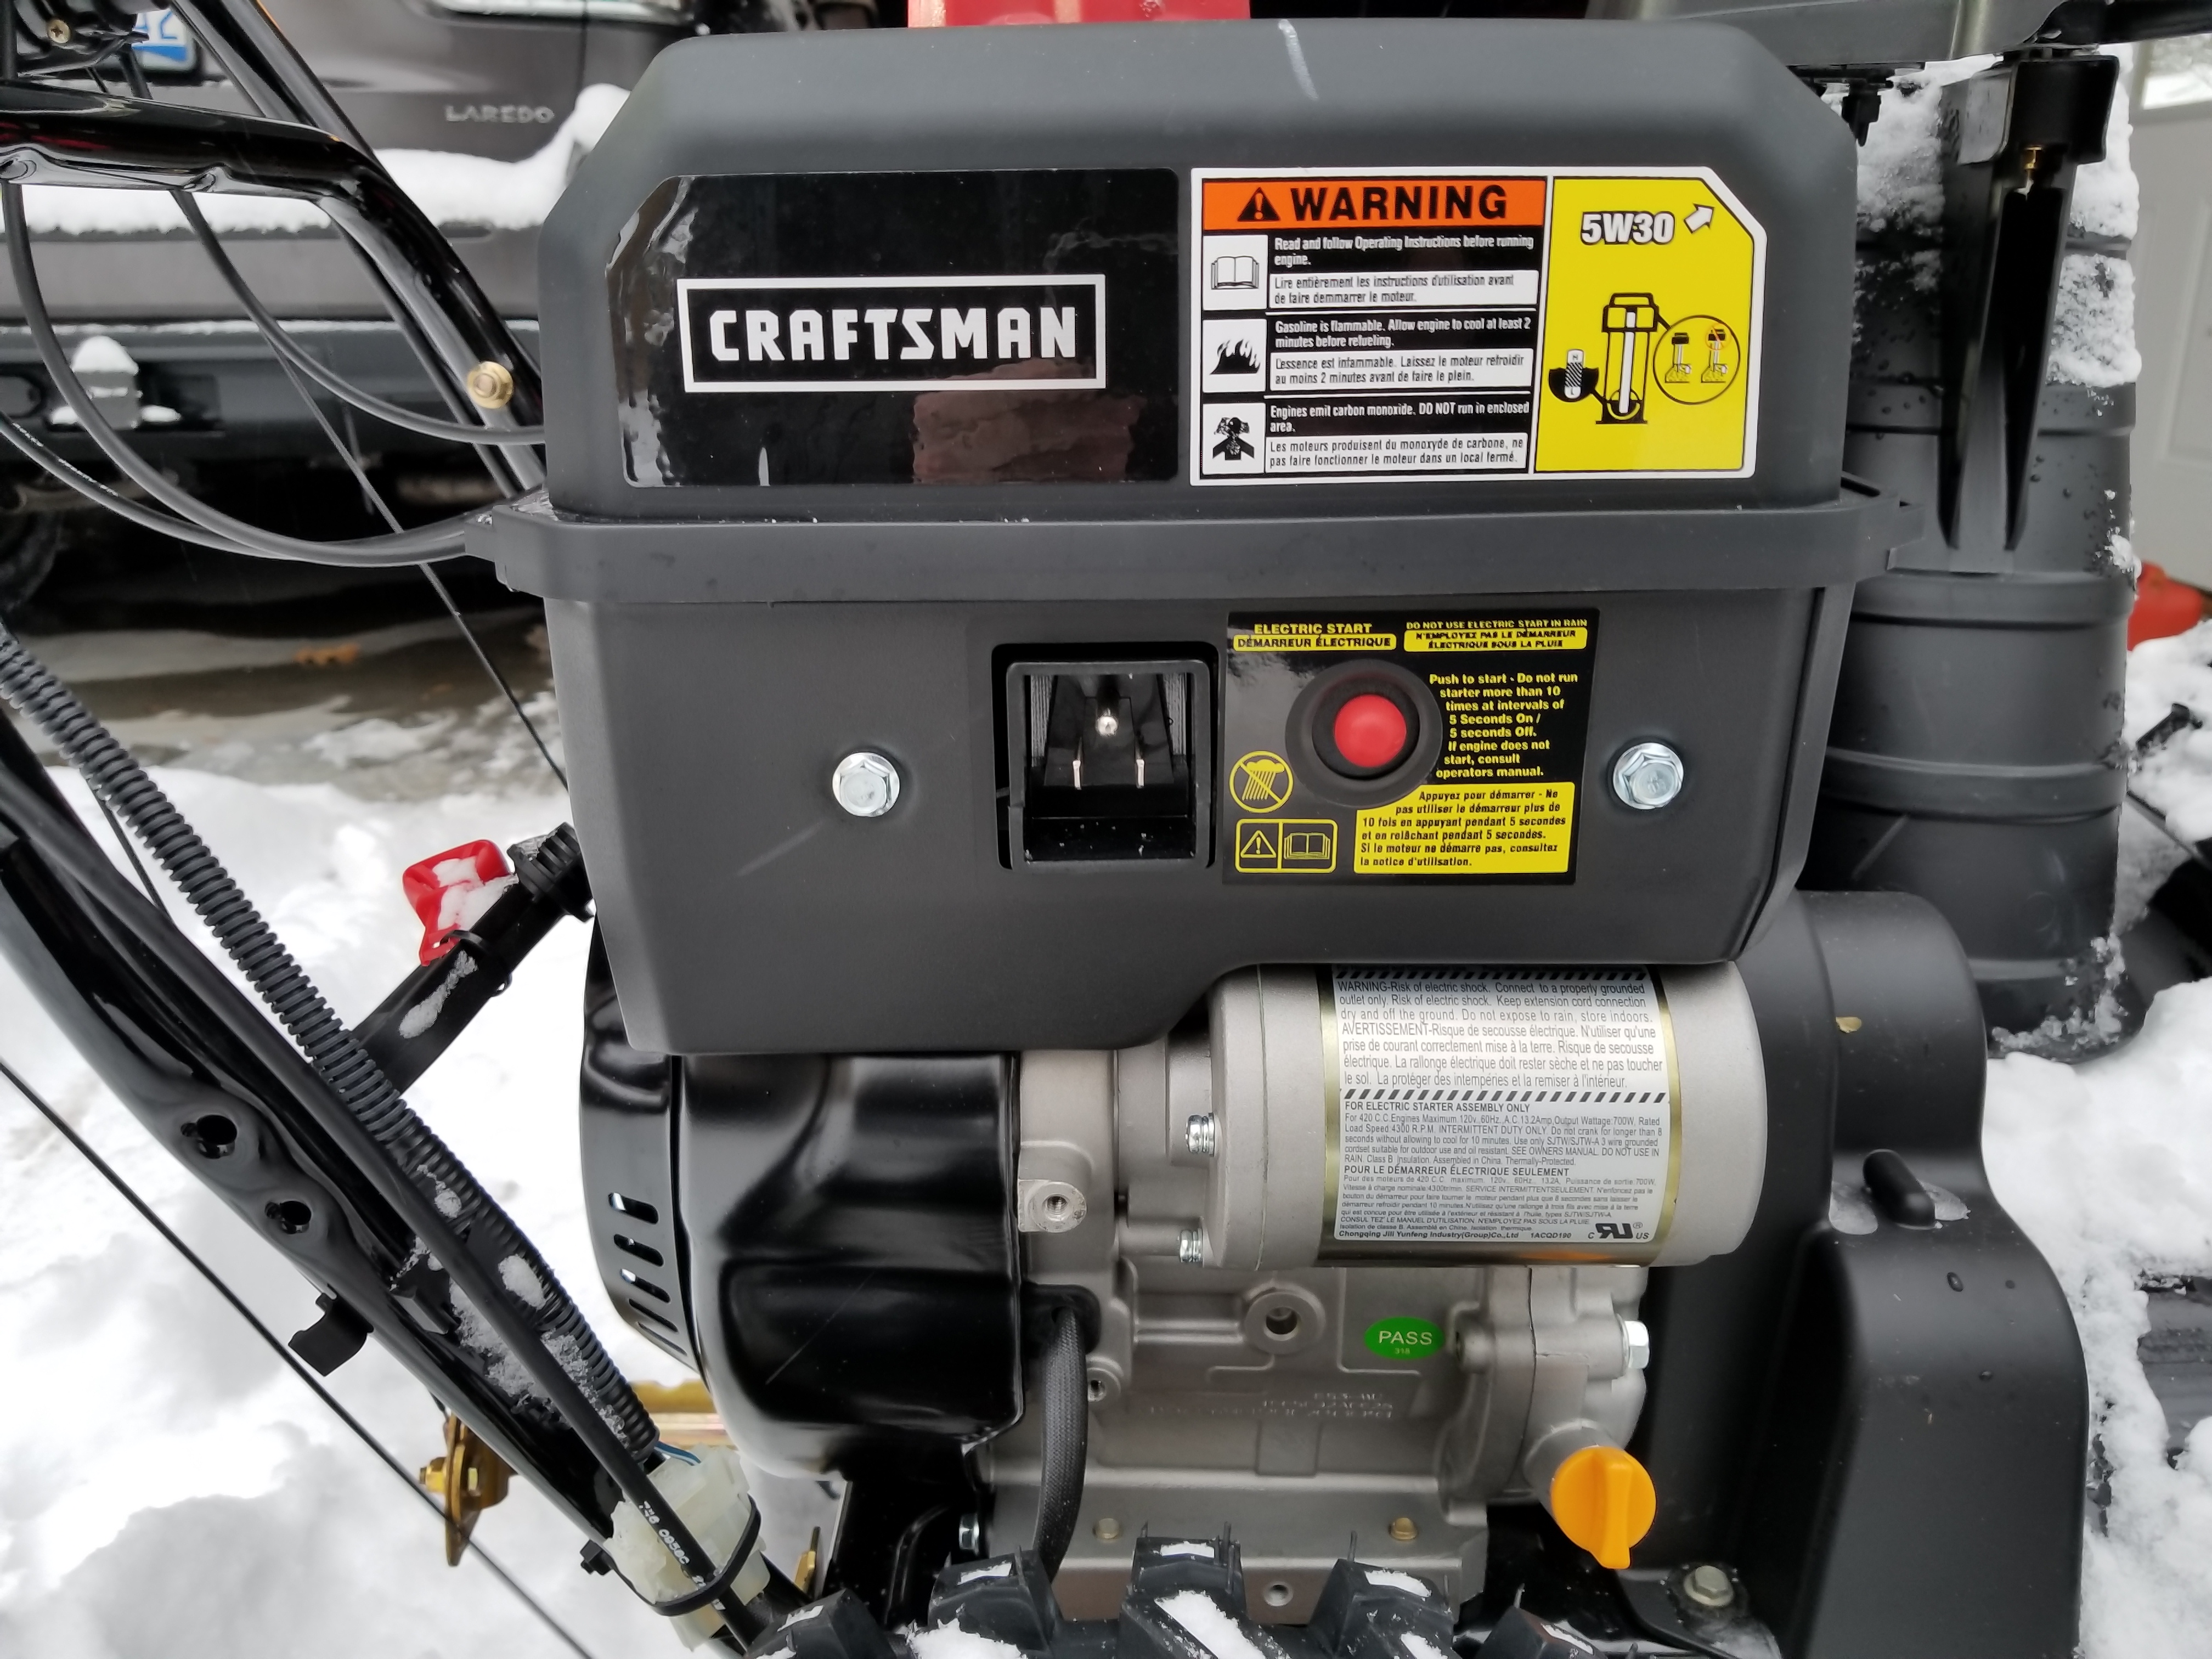 2018 Craftsman Snow Blower Review - What's New - Which One Is Best For You?  